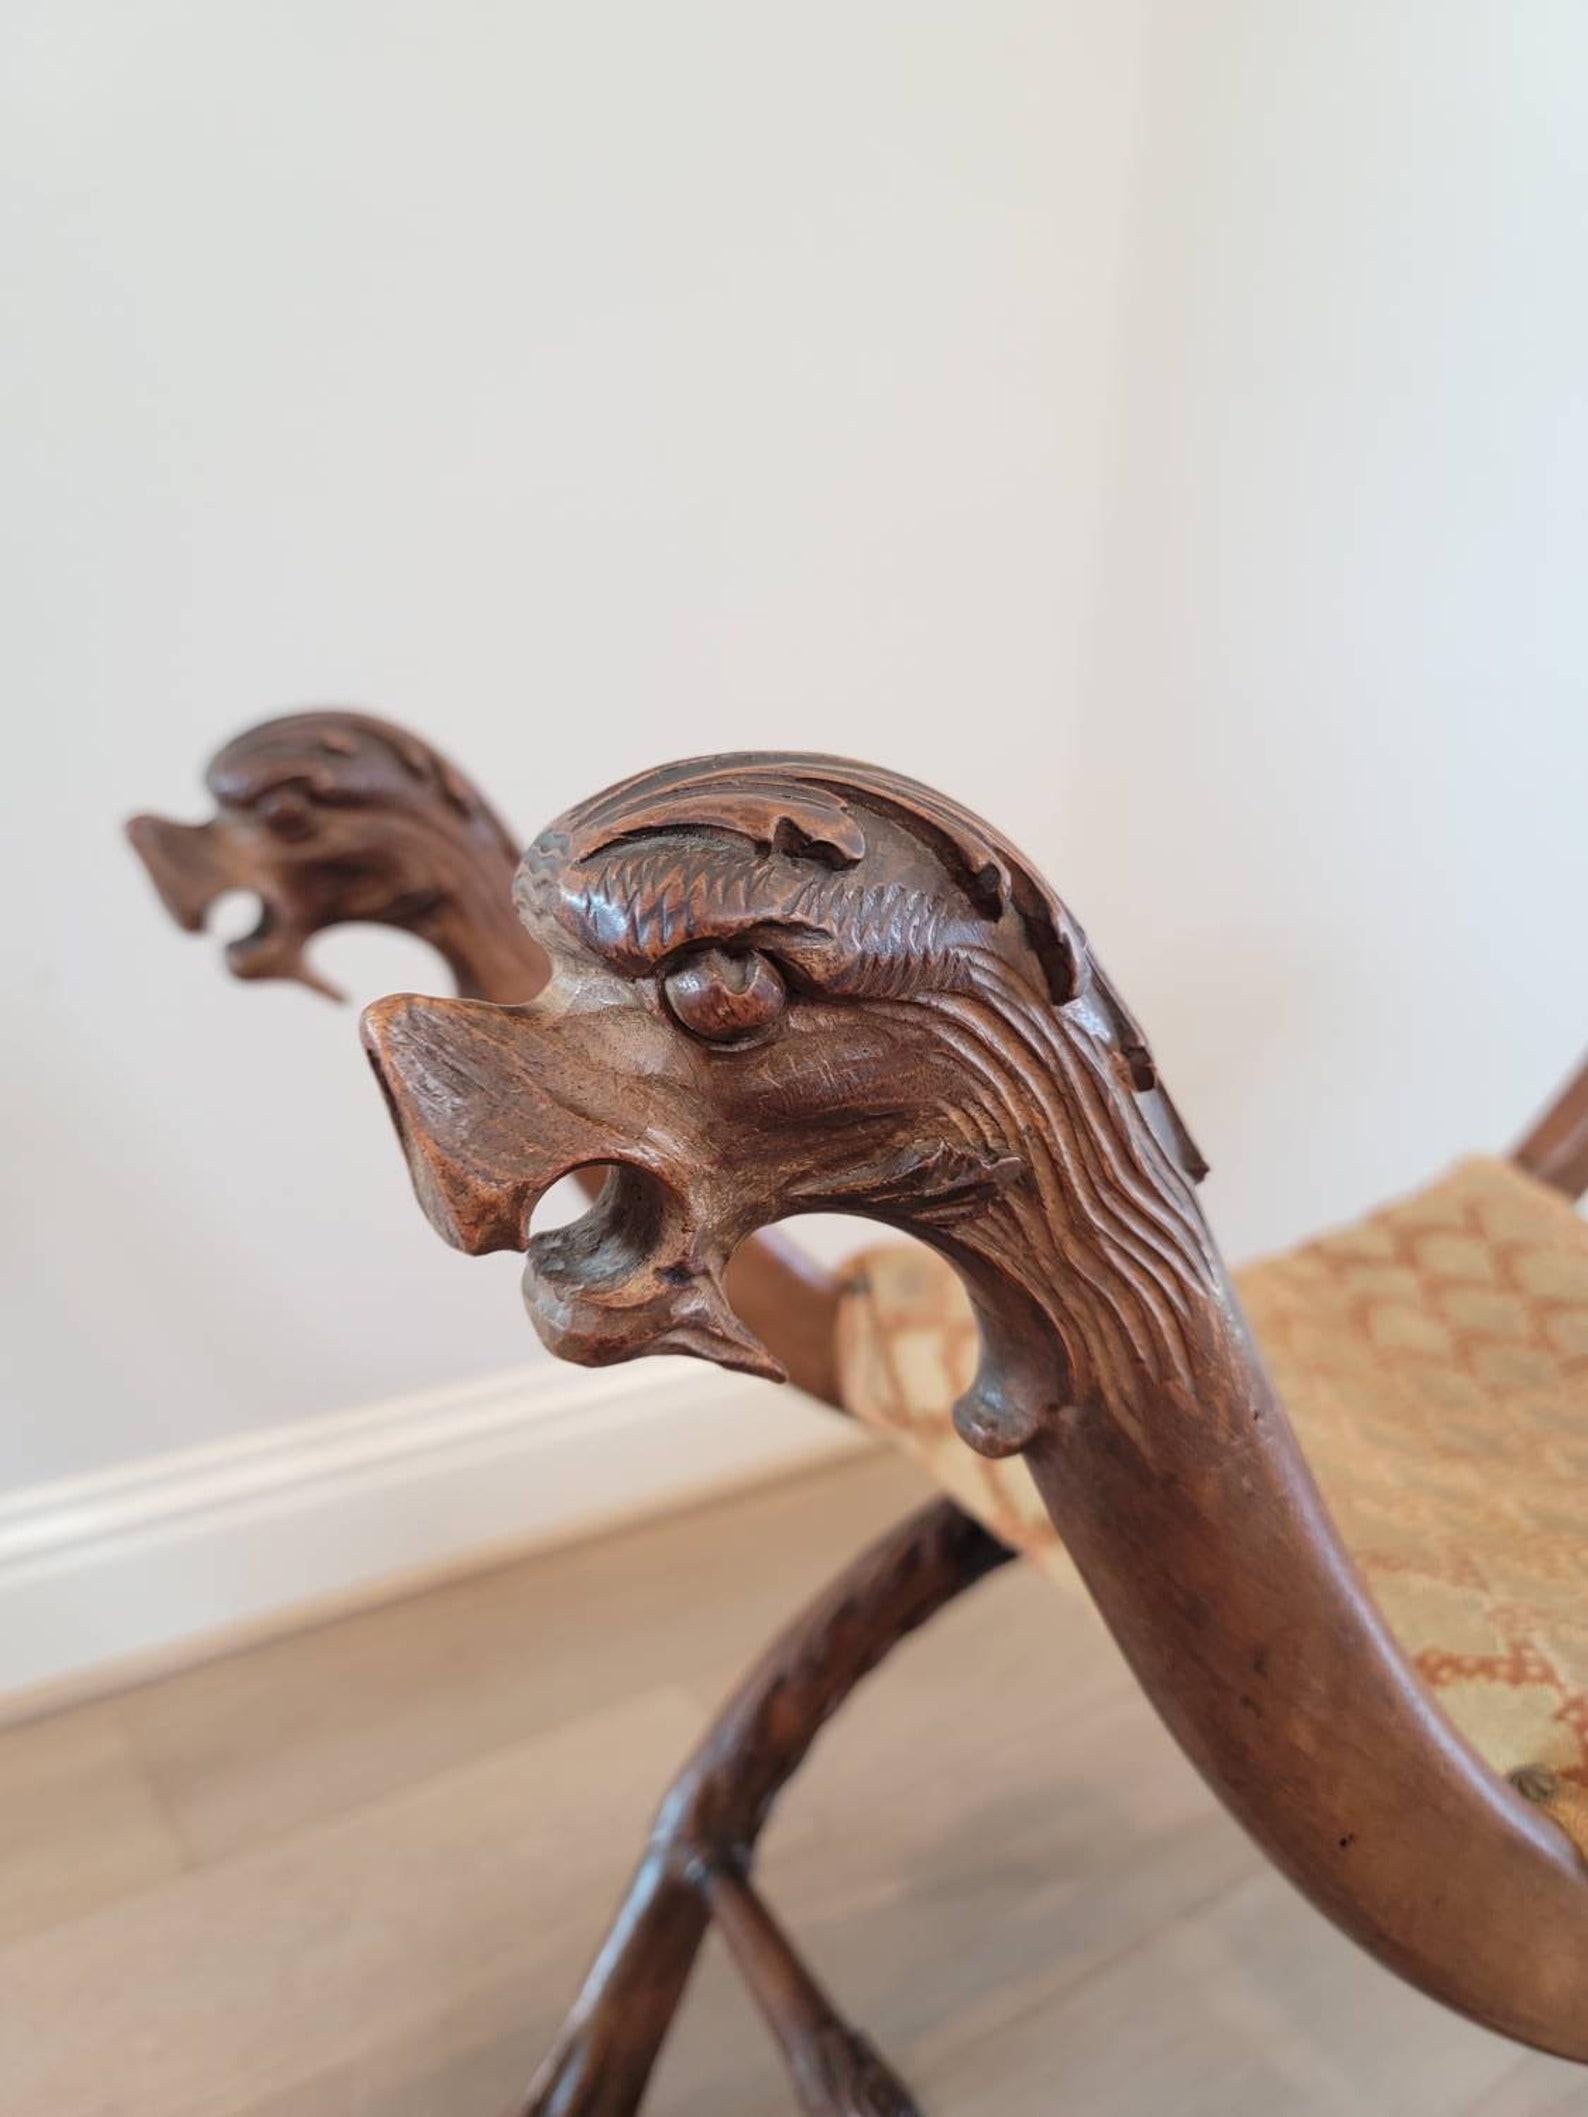 A exceptionally carved Italian Renaissance Revival figural curule stool.

Born in Italy during the late 19th century, hand-crafted of warm, rich, finely carved solid walnut, finished in medieval Henry II style / Italian Empire taste, featuring